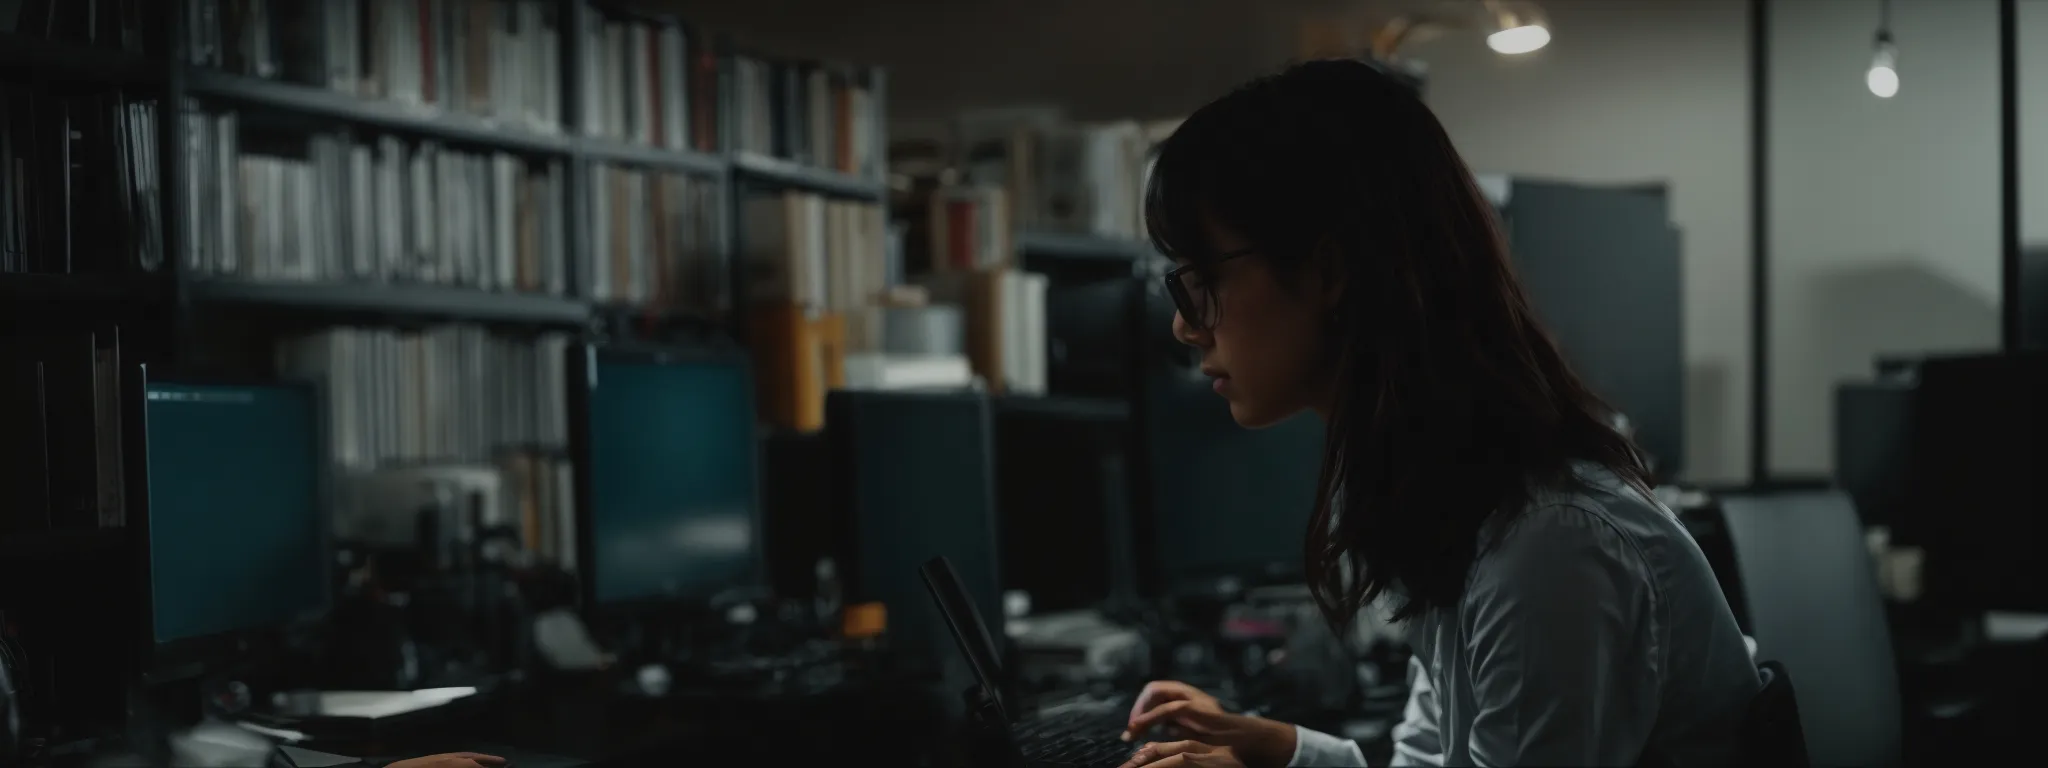 a focused individual typing on a computer in a well-organized office setup.